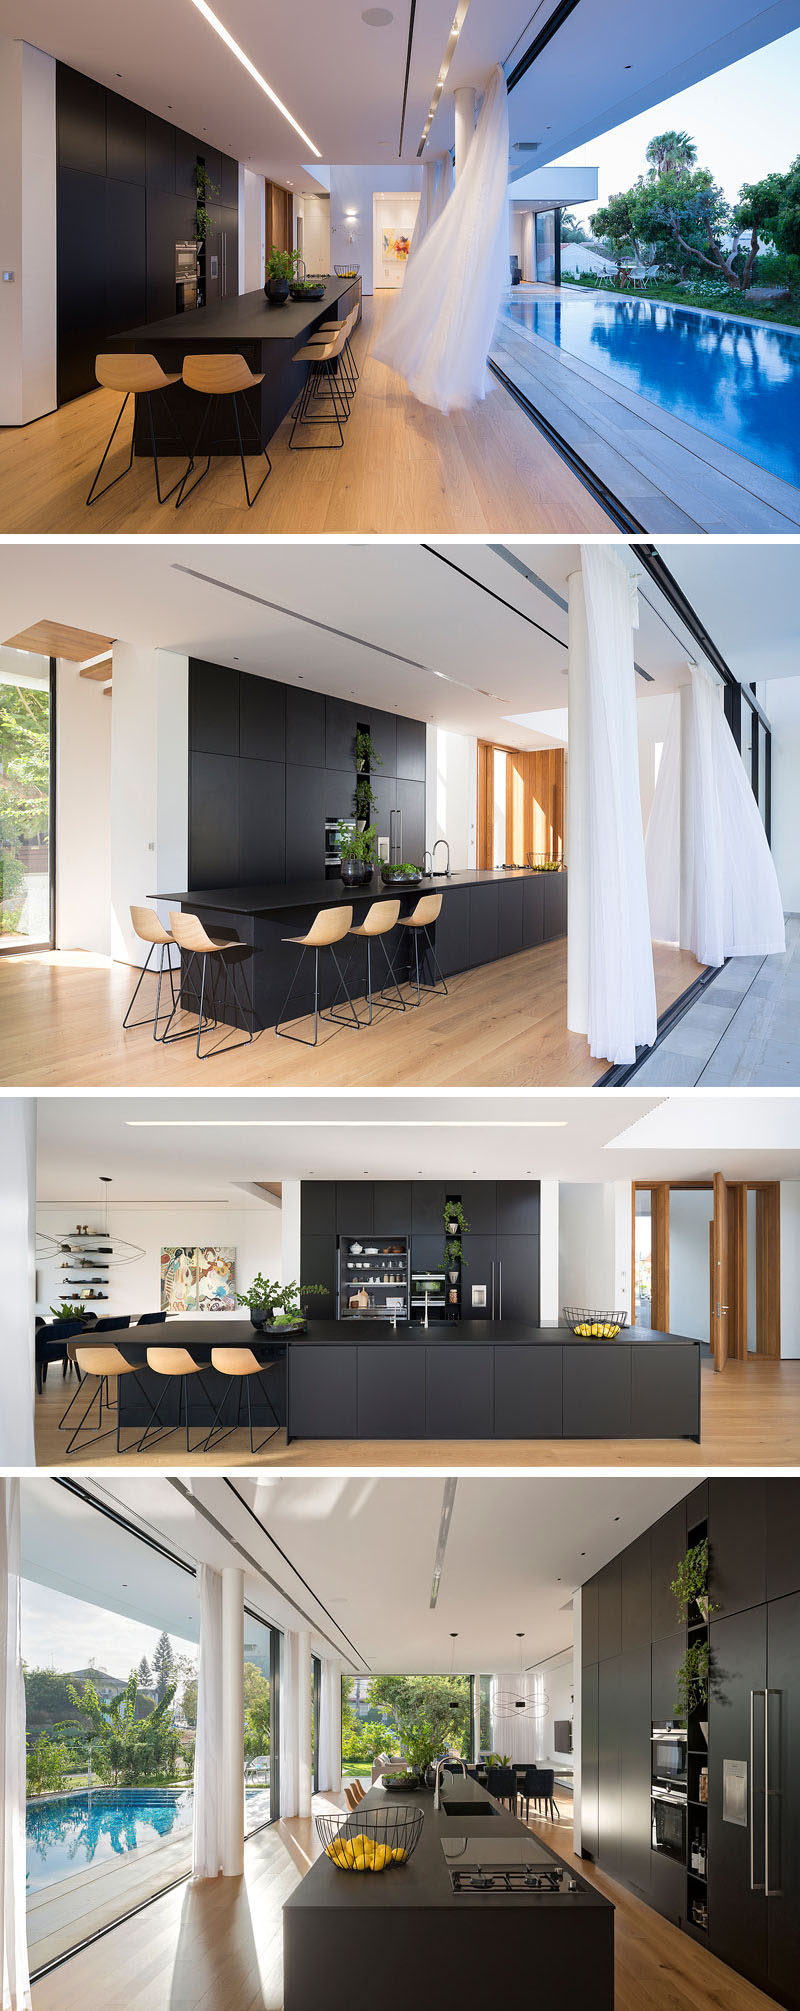 This matte black kitchen is a strong contrast the the rest of the house, where the walls are mostly white. A long island creates plenty of counterspace and acts as a casual dining area, while the wall is home to floor-to-ceiling cabinetry, allowing for plenty of storage.